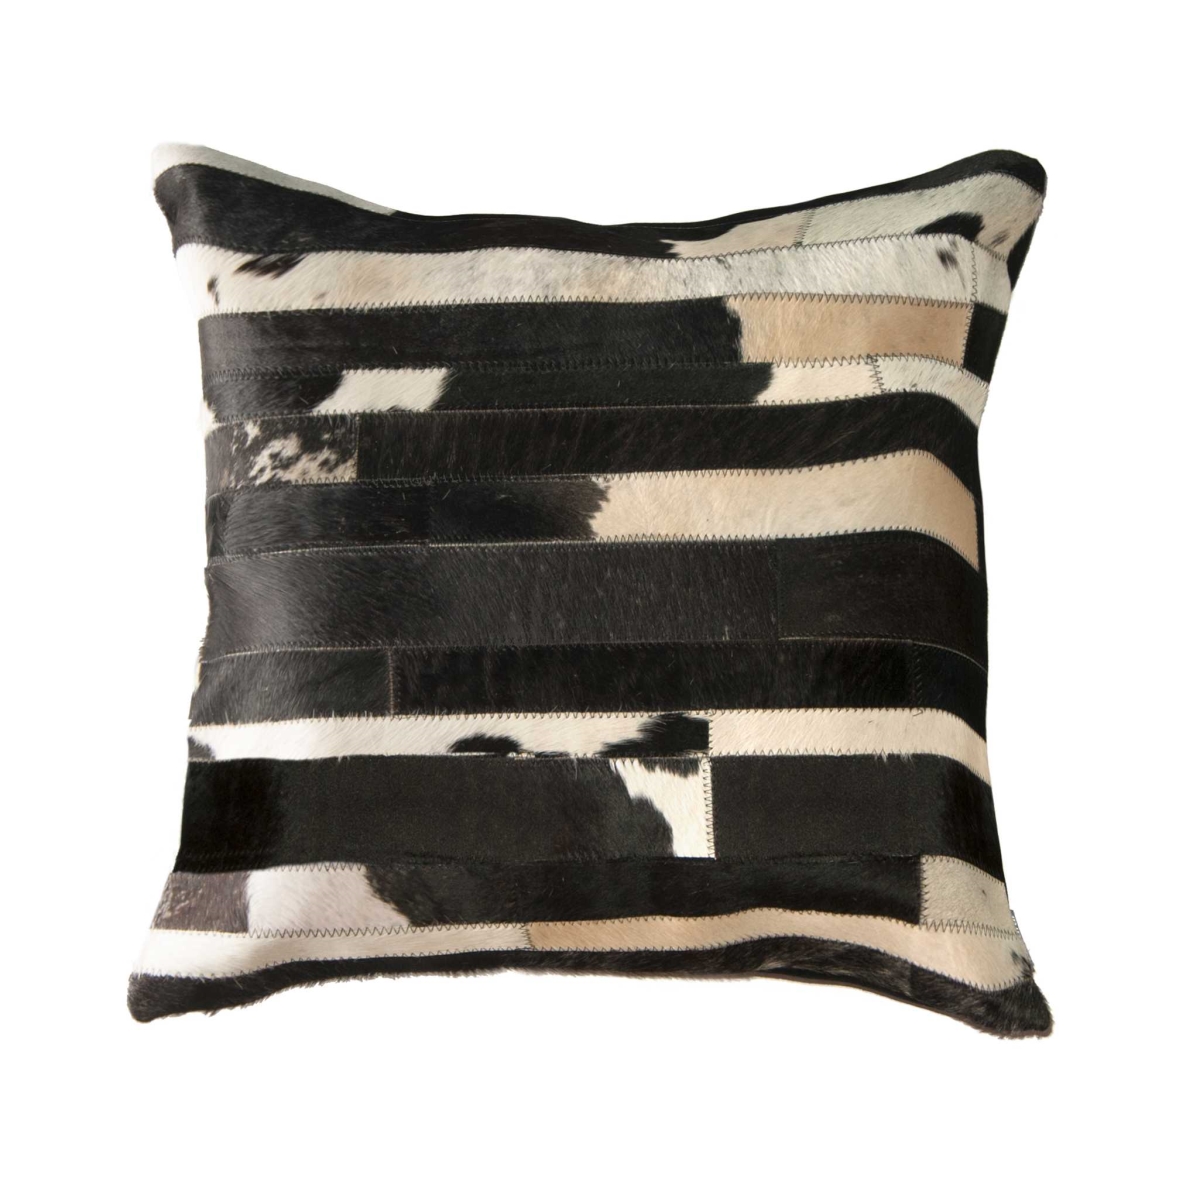 Home Roots Beddings 332304 Torino Classic Large Madrid Cowhide Pillow, Black & White - 22 X 22 In.